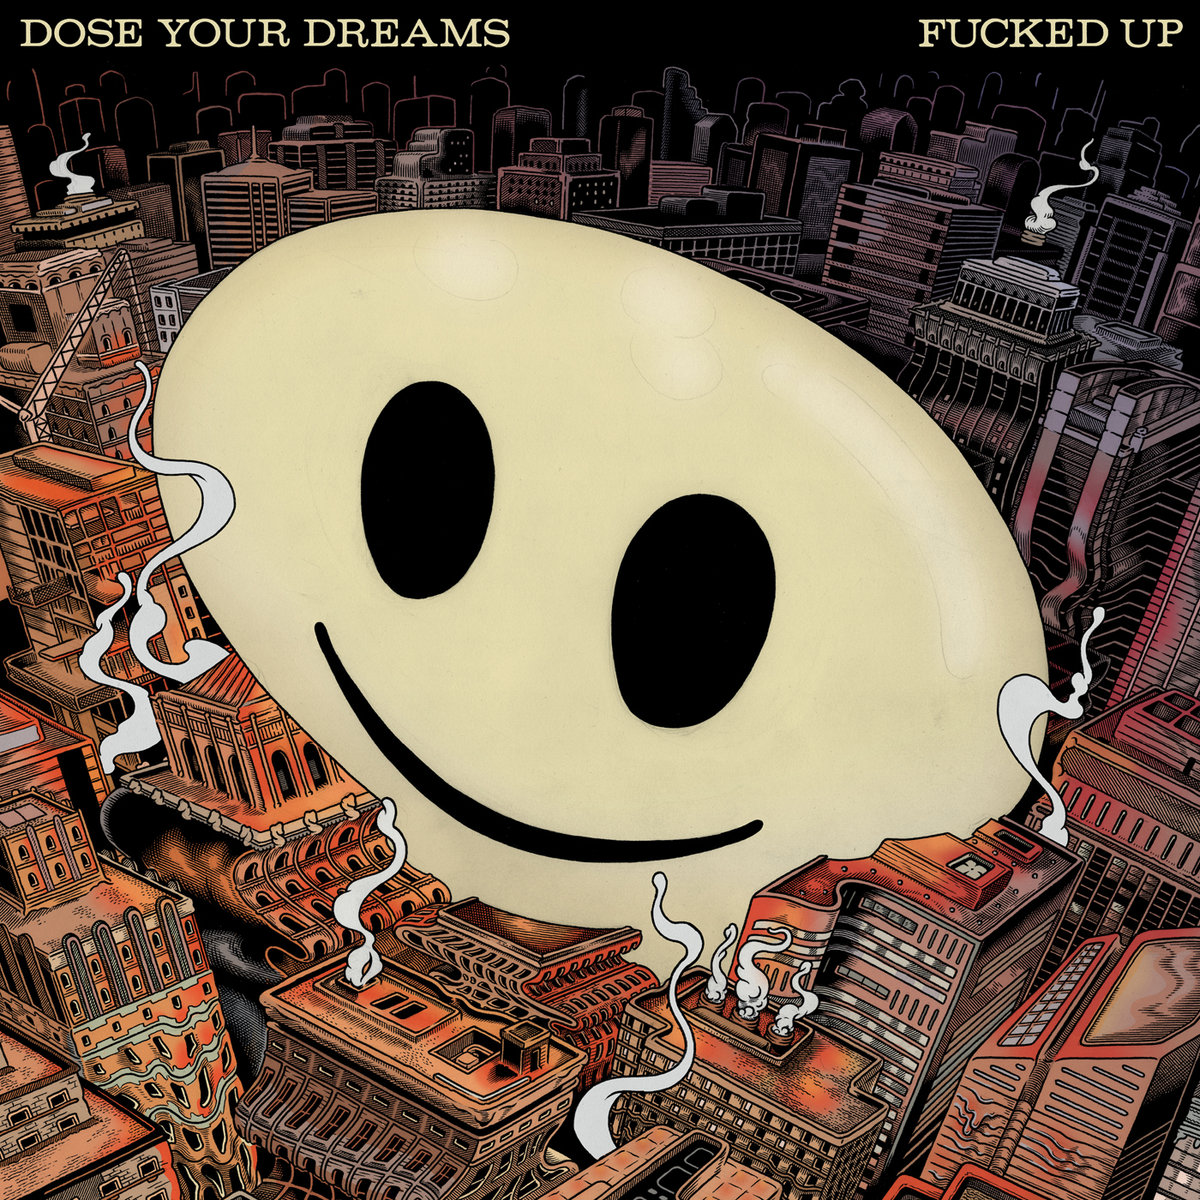 F*cked Up: 'Dose Your Dreams'